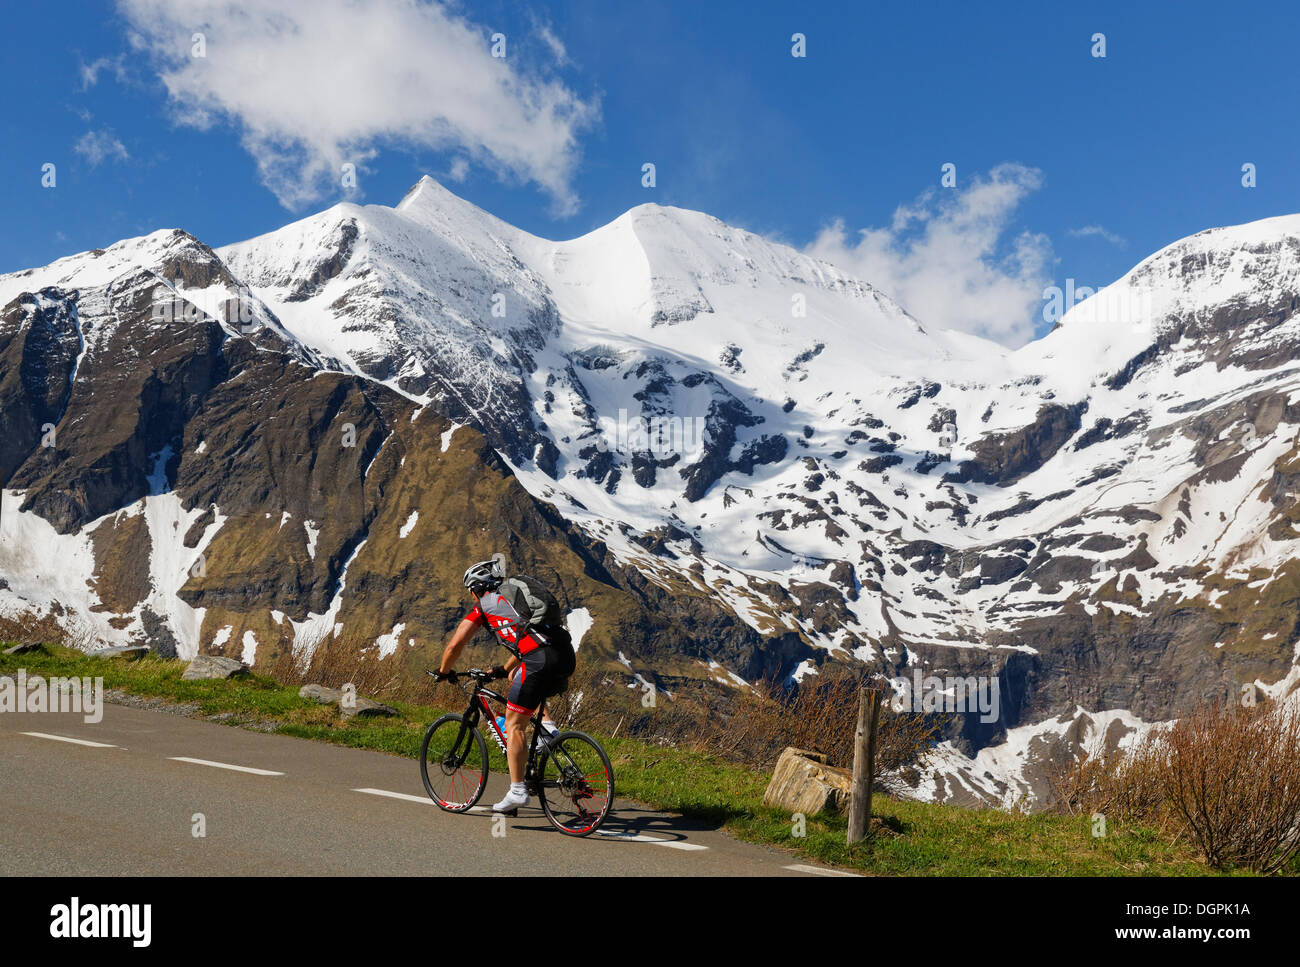 Glockner Group with Sonnenwelleck Mountain and Fuschlkarkopf Mountain, cyclists on Grossglockner High Alpine Road Stock Photo